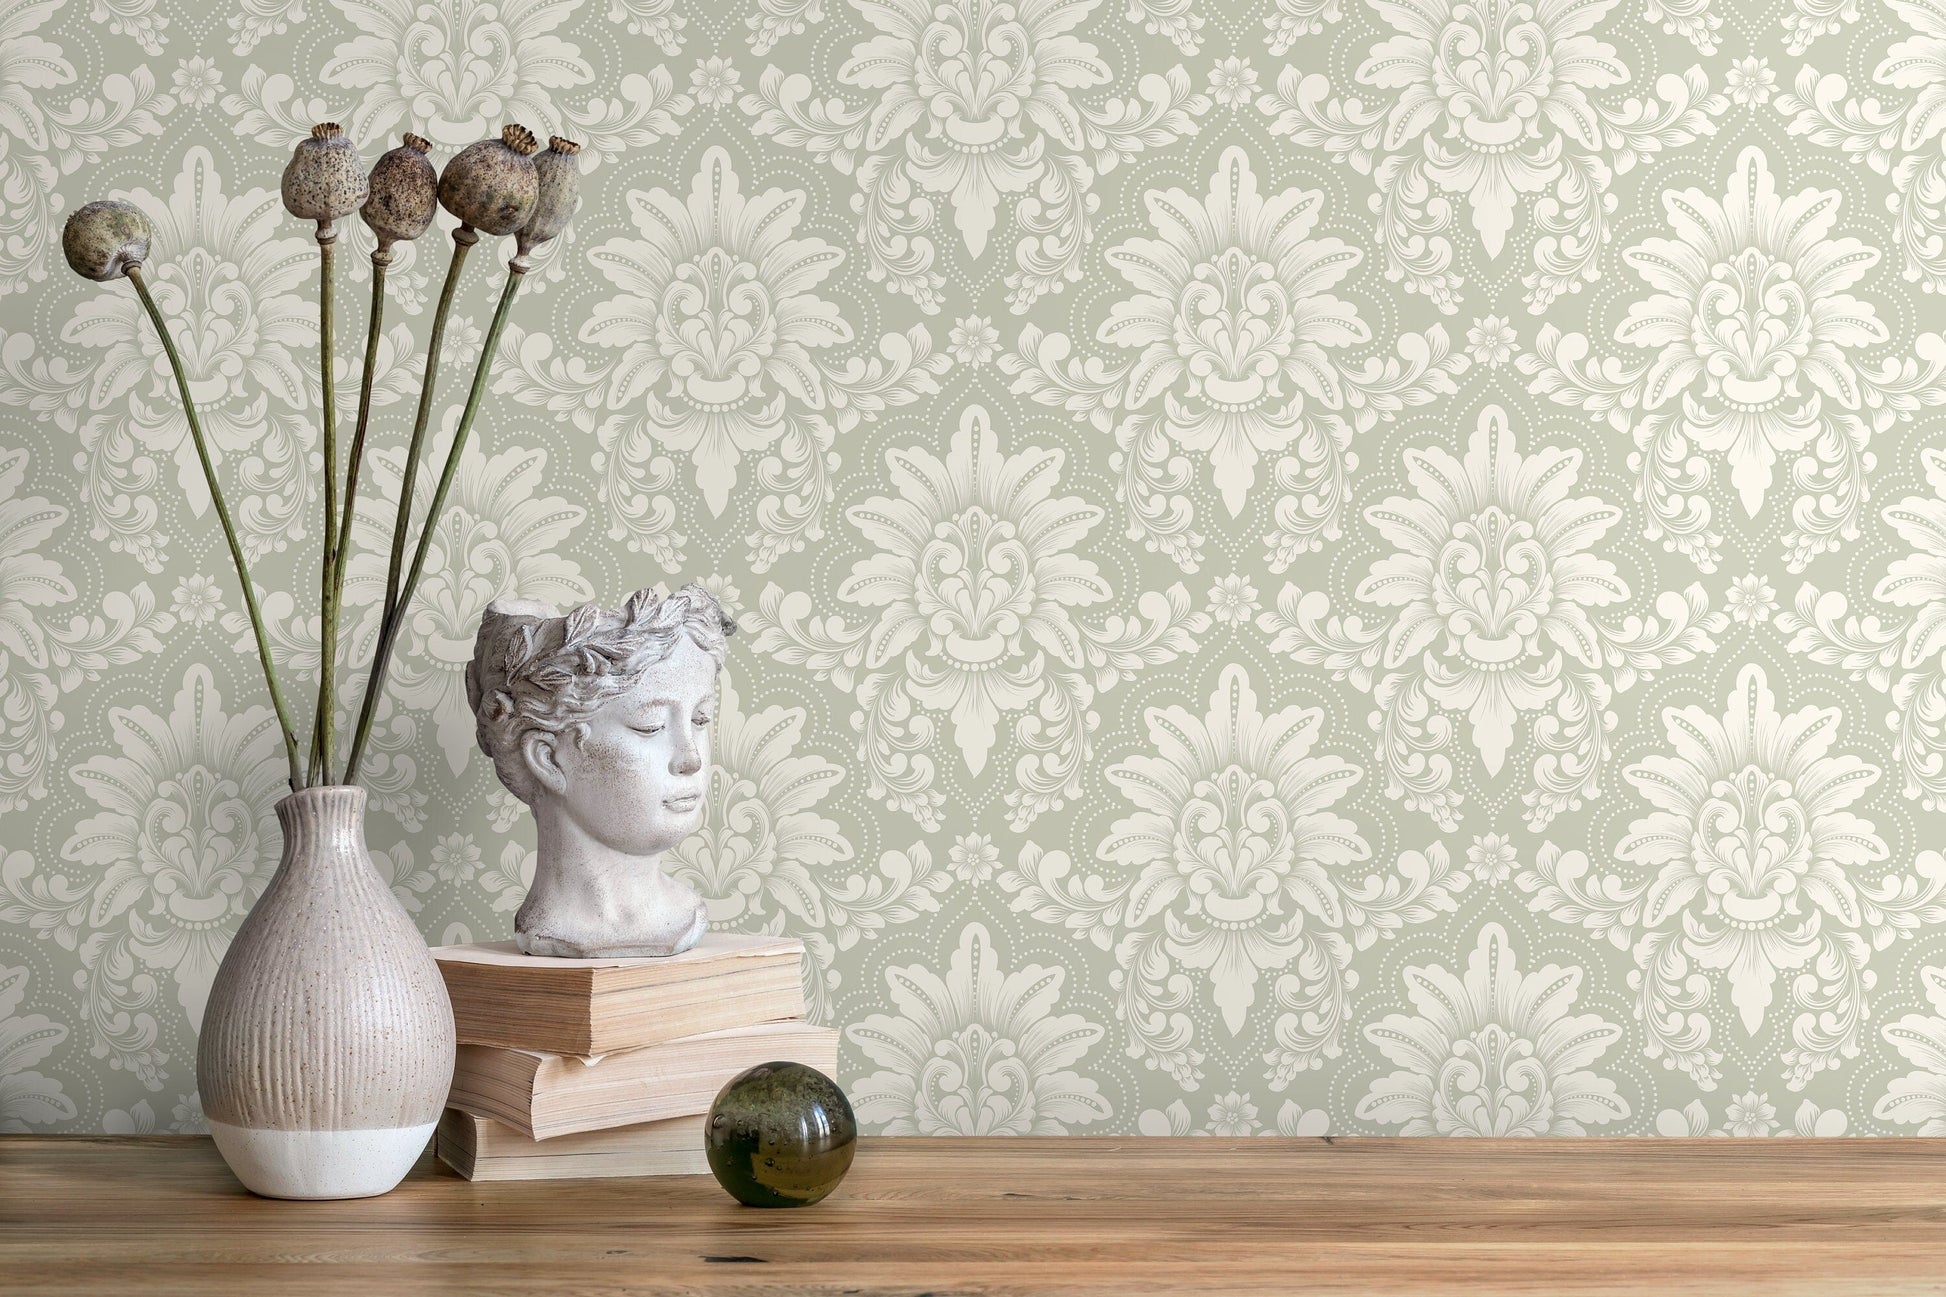 Neutral Vintage Damask Wallpaper / Peel and Stick Wallpaper Removable Wallpaper Home Decor Wall Art Wall Decor Room Decor - D064